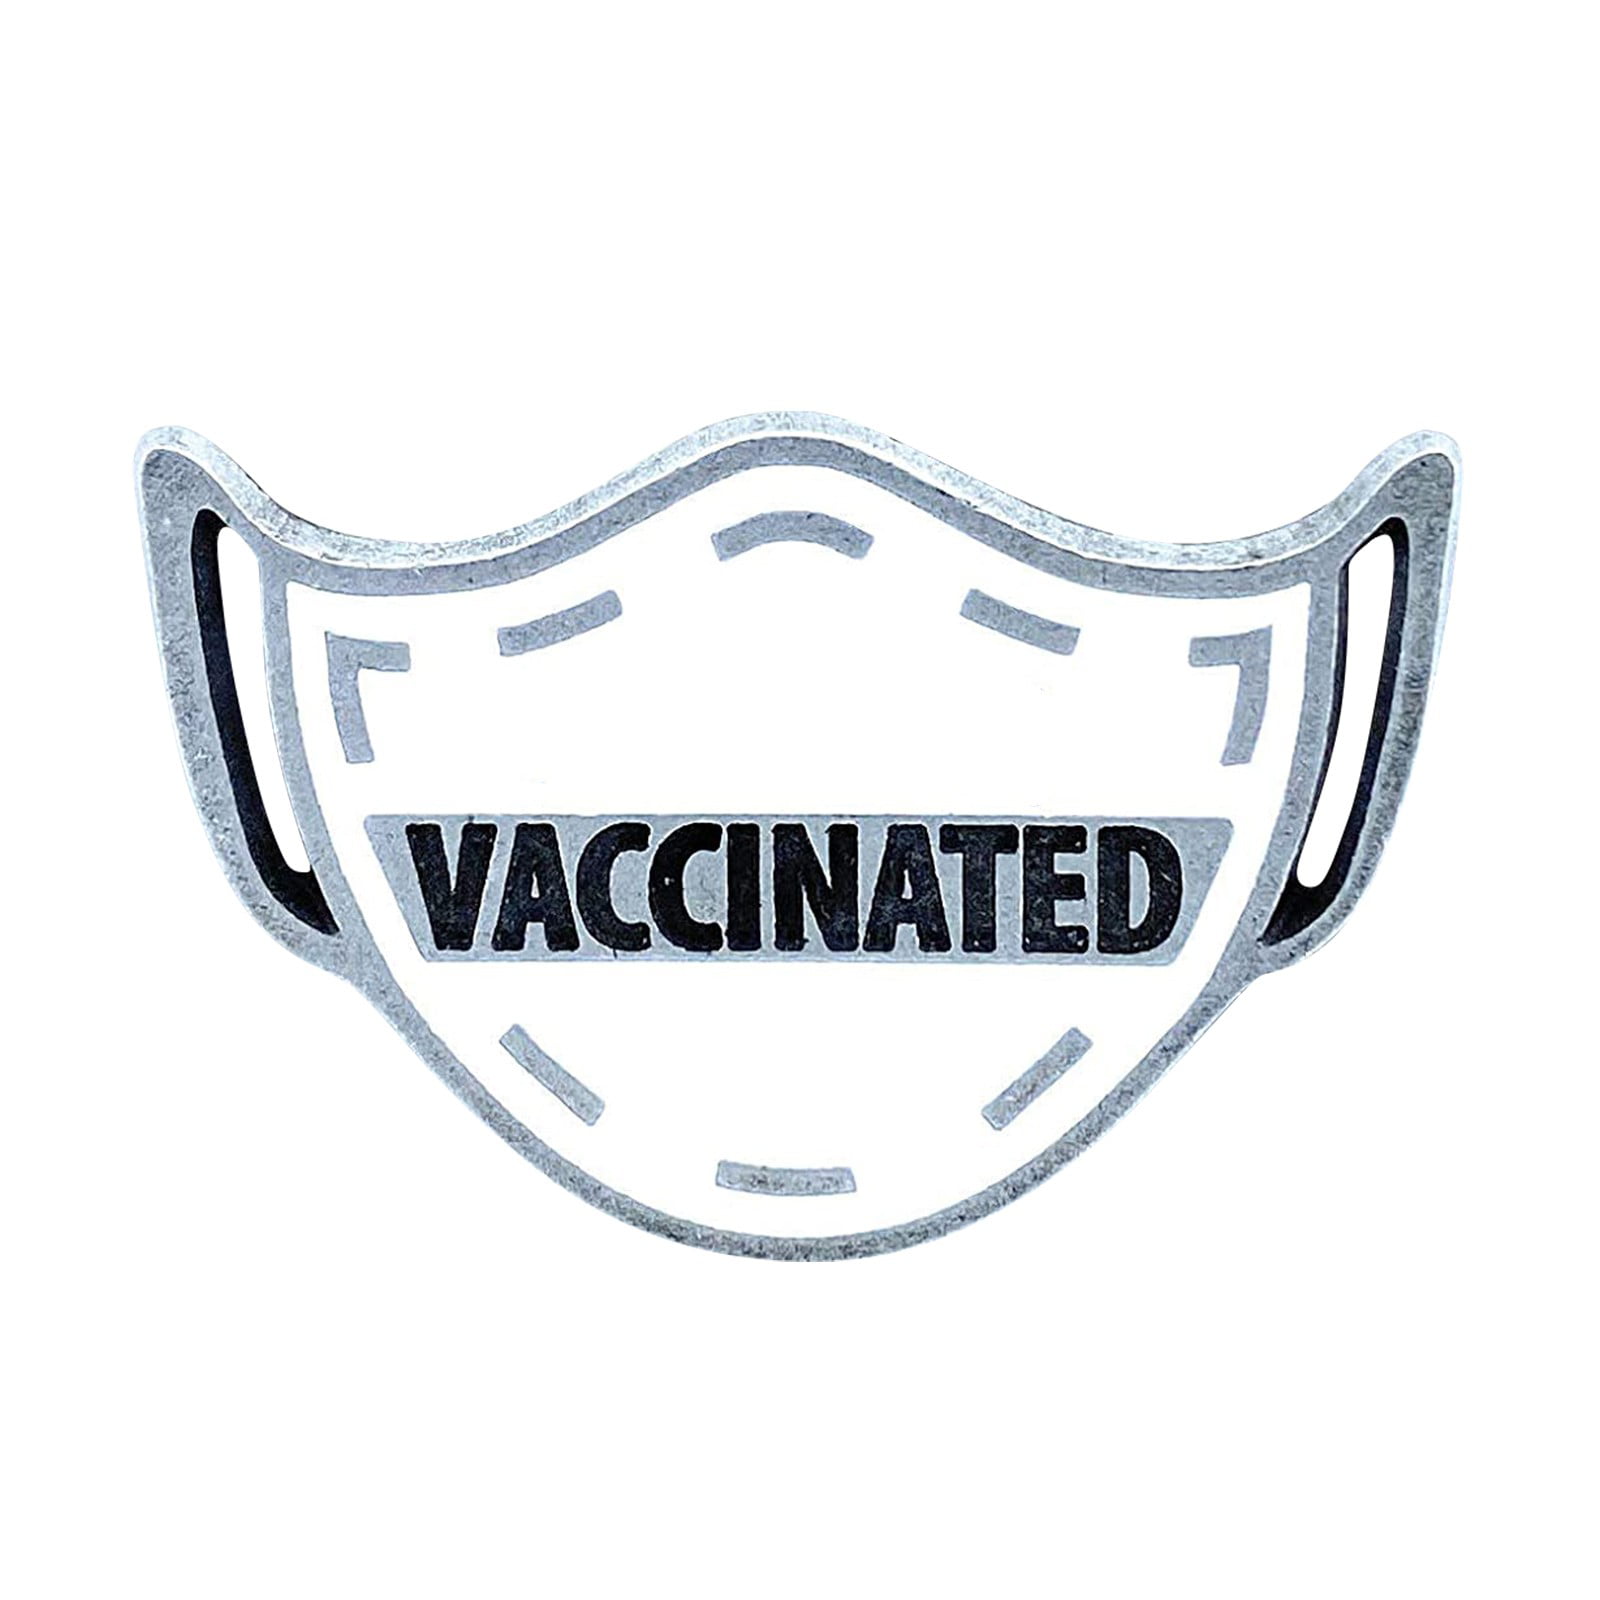 I Have Been Vaccinated Pin Metal Lapel Pin Adult Brooches Metal Brooche U IS 